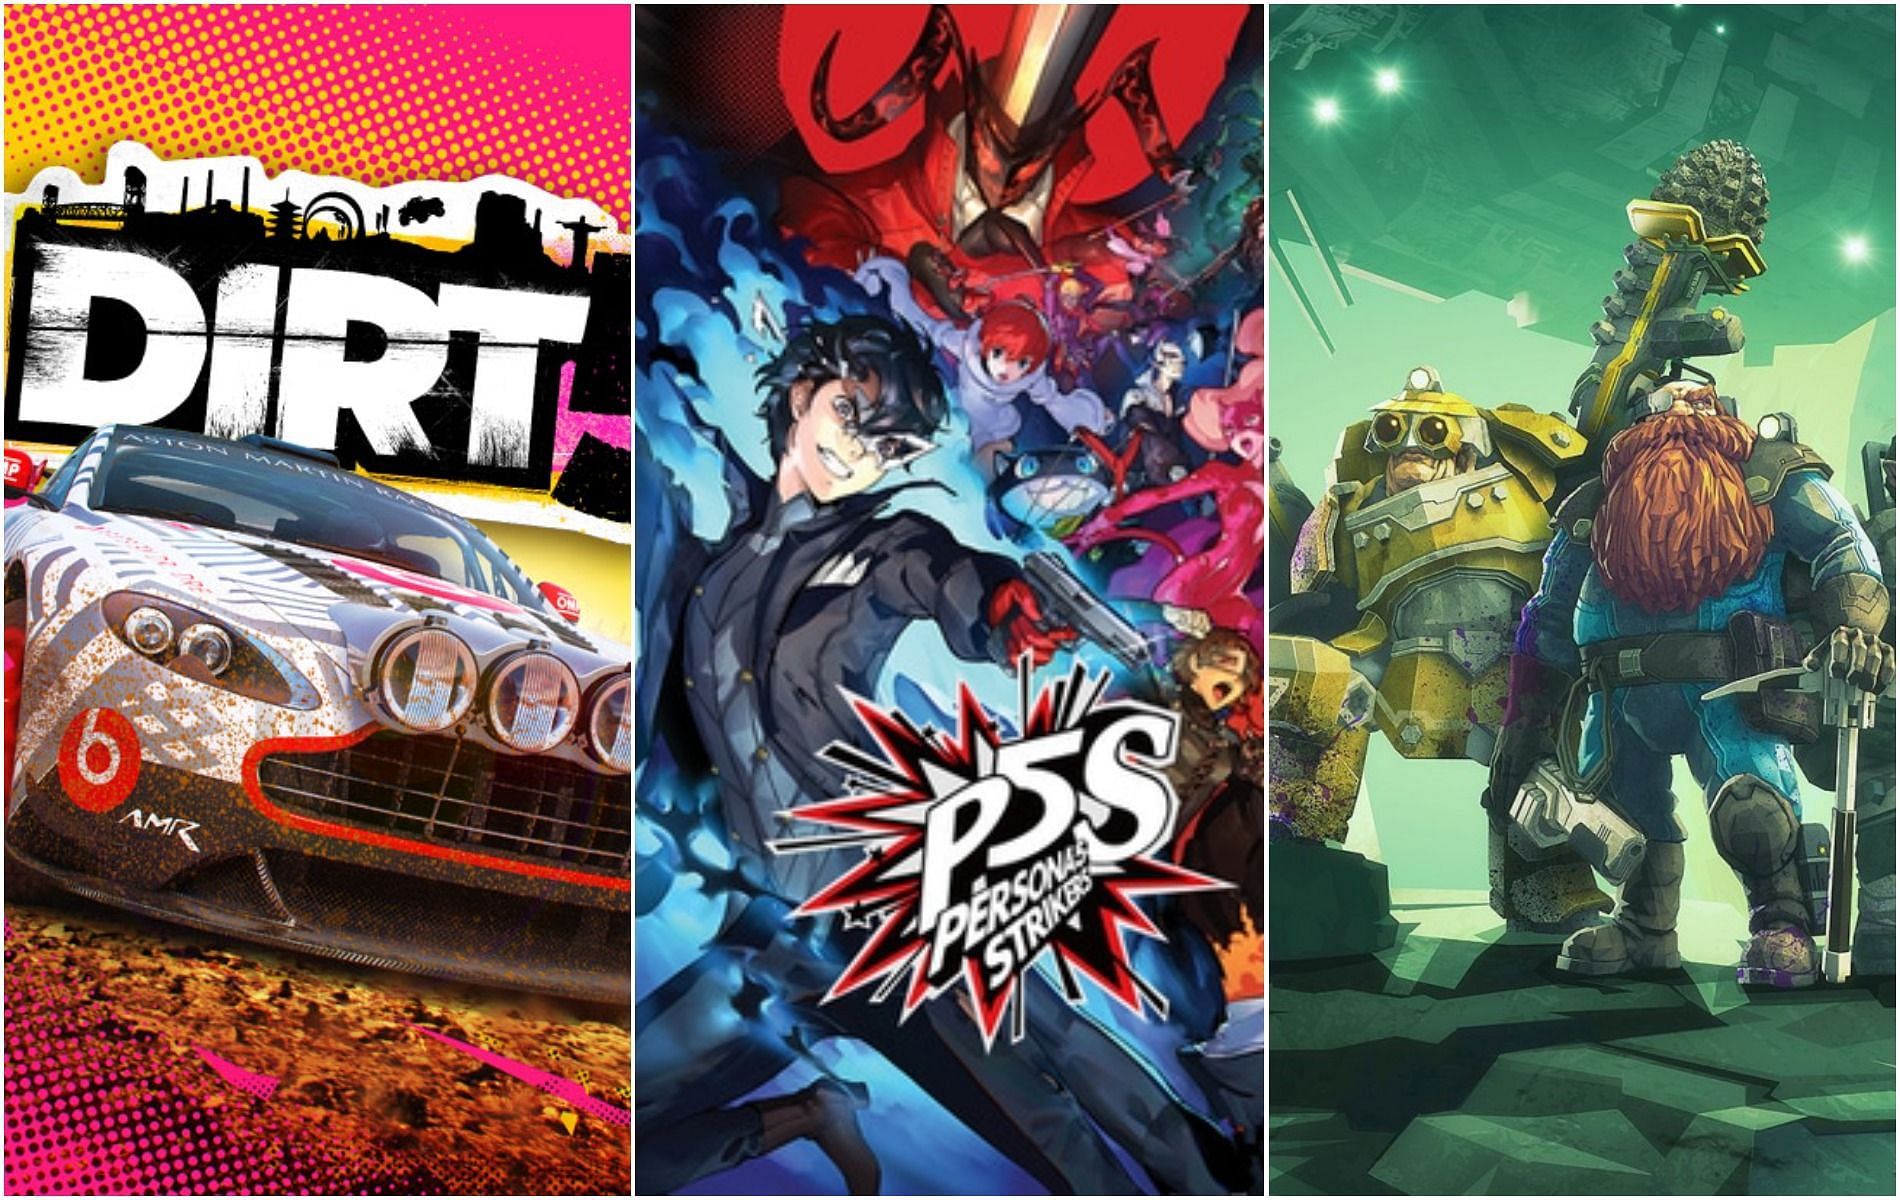 Persona 5 Strikers, Dirt 5, and Deep Rock Galactic are the PlayStation Plus free games for January 2022 (Images via Dirt 5, Atlas, and Deep Rock Galactic)